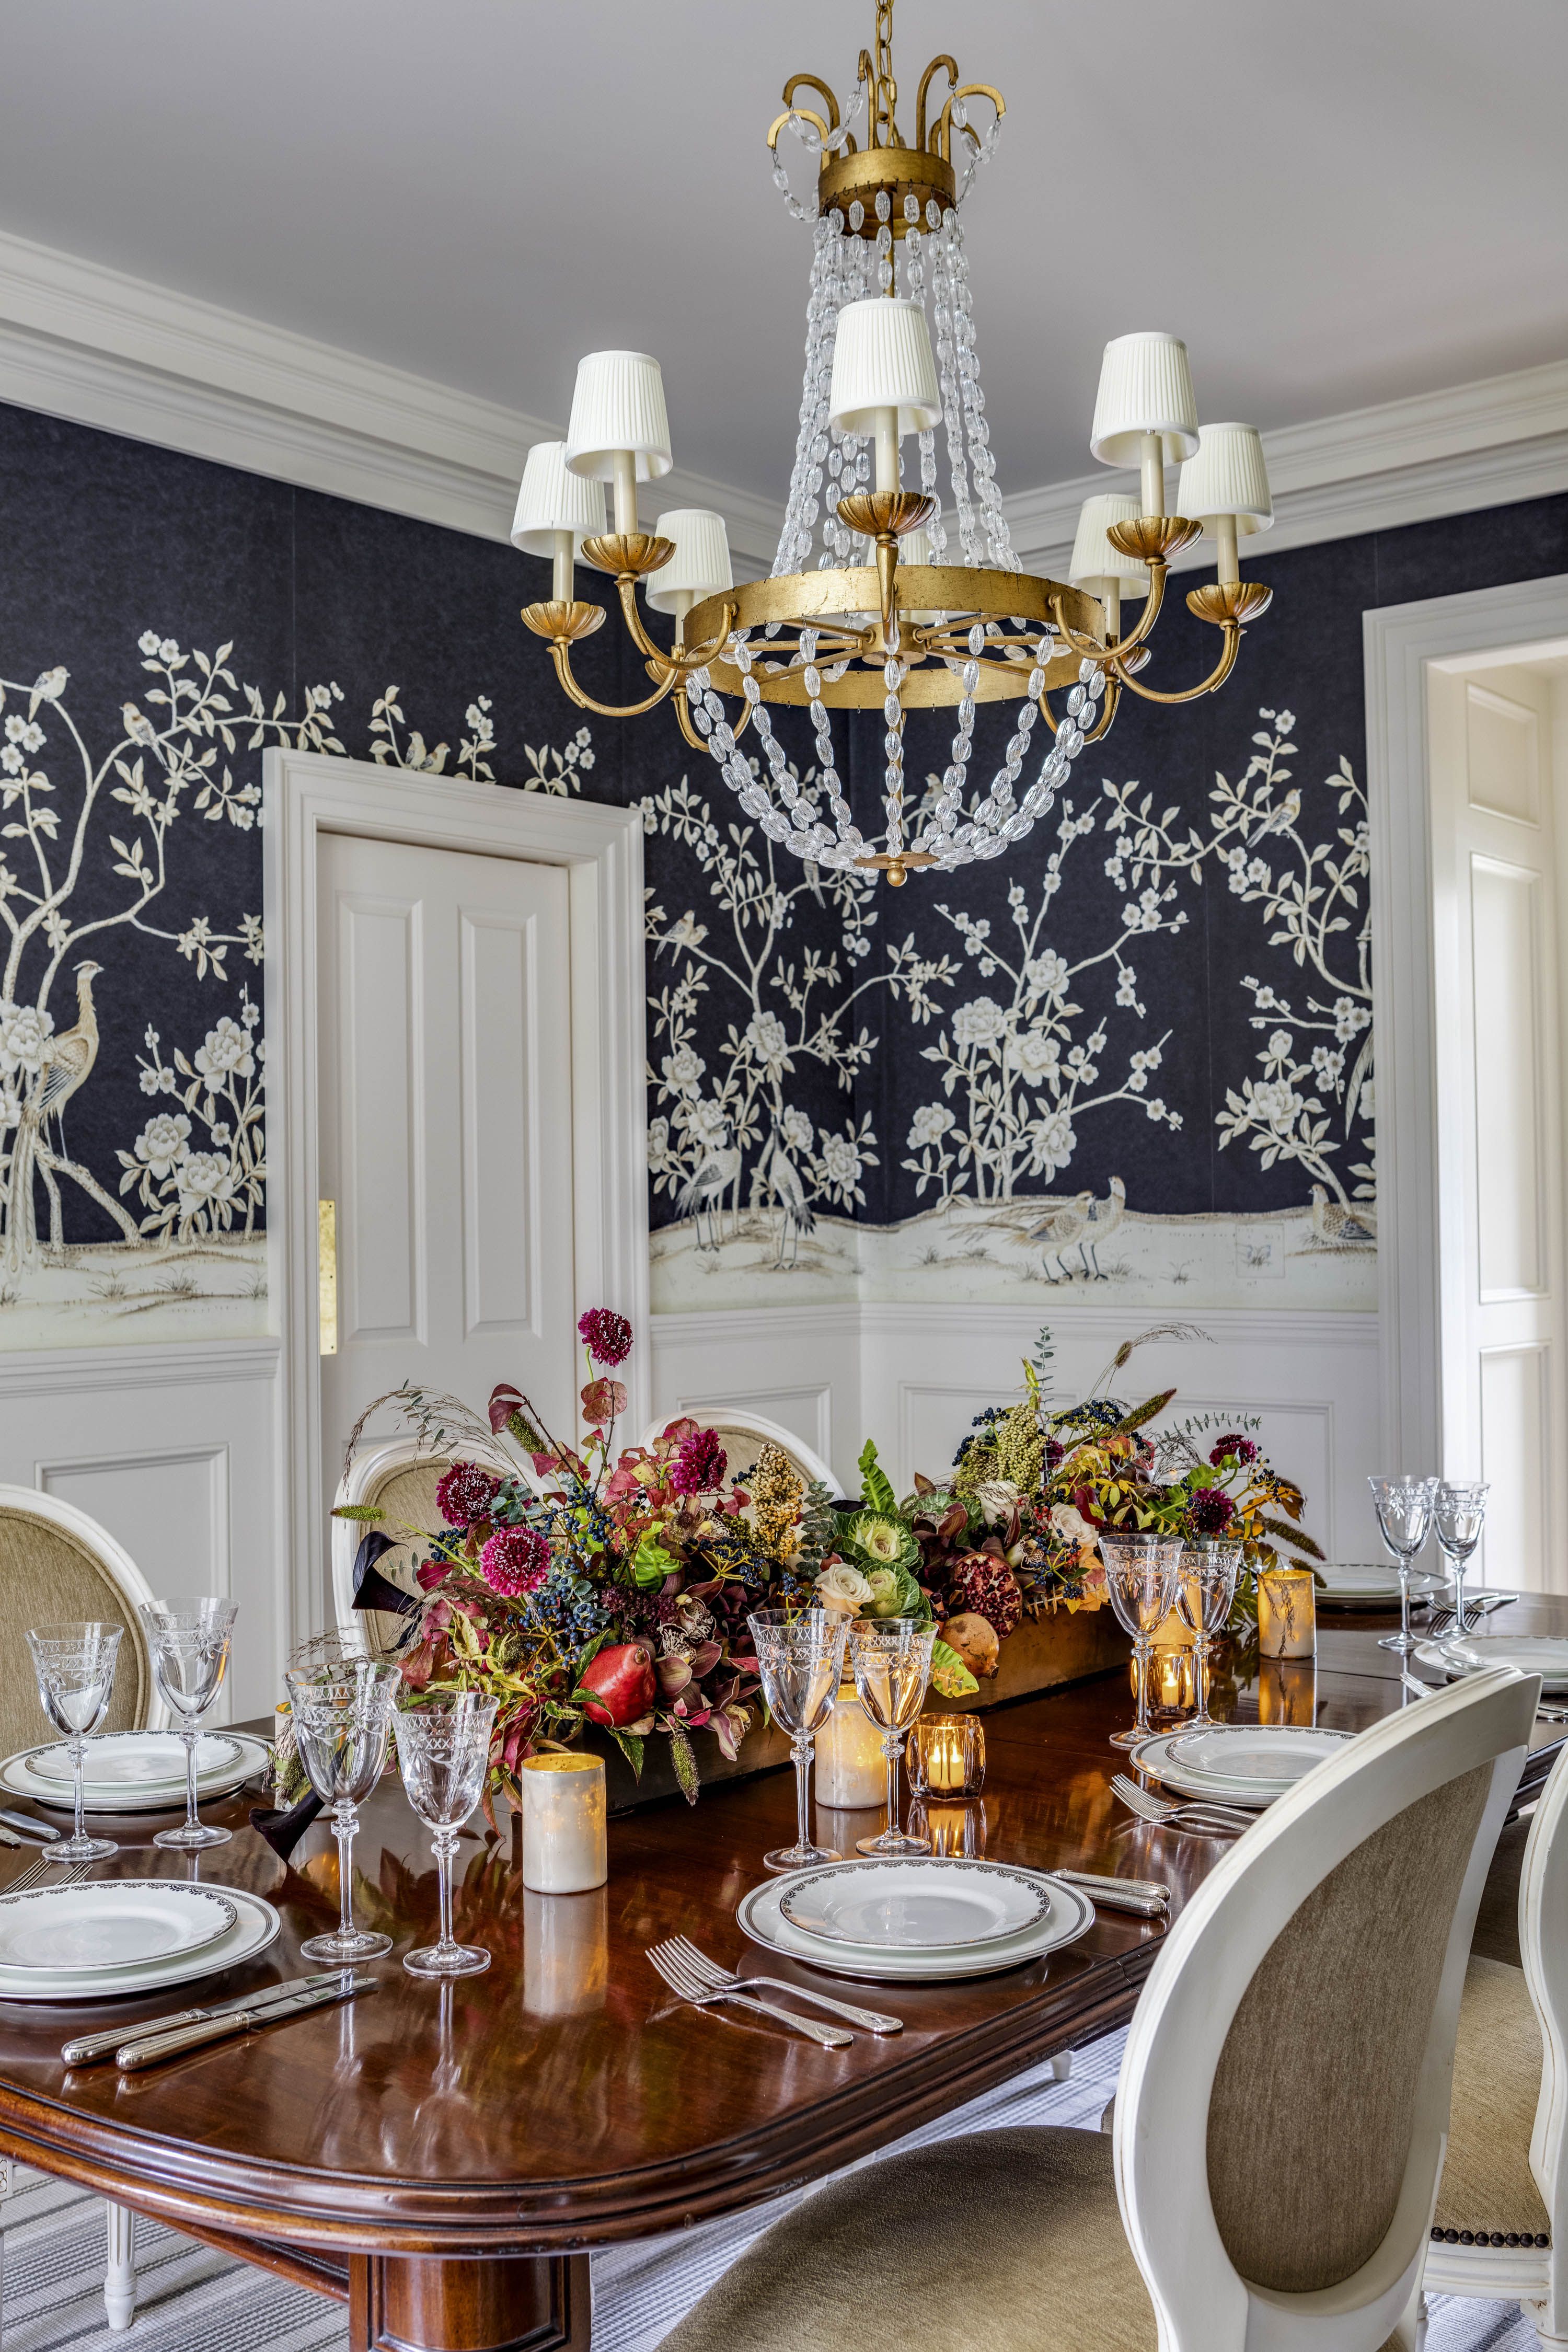 Dining room wallpaper ideas 11 ways to decorate for drama 